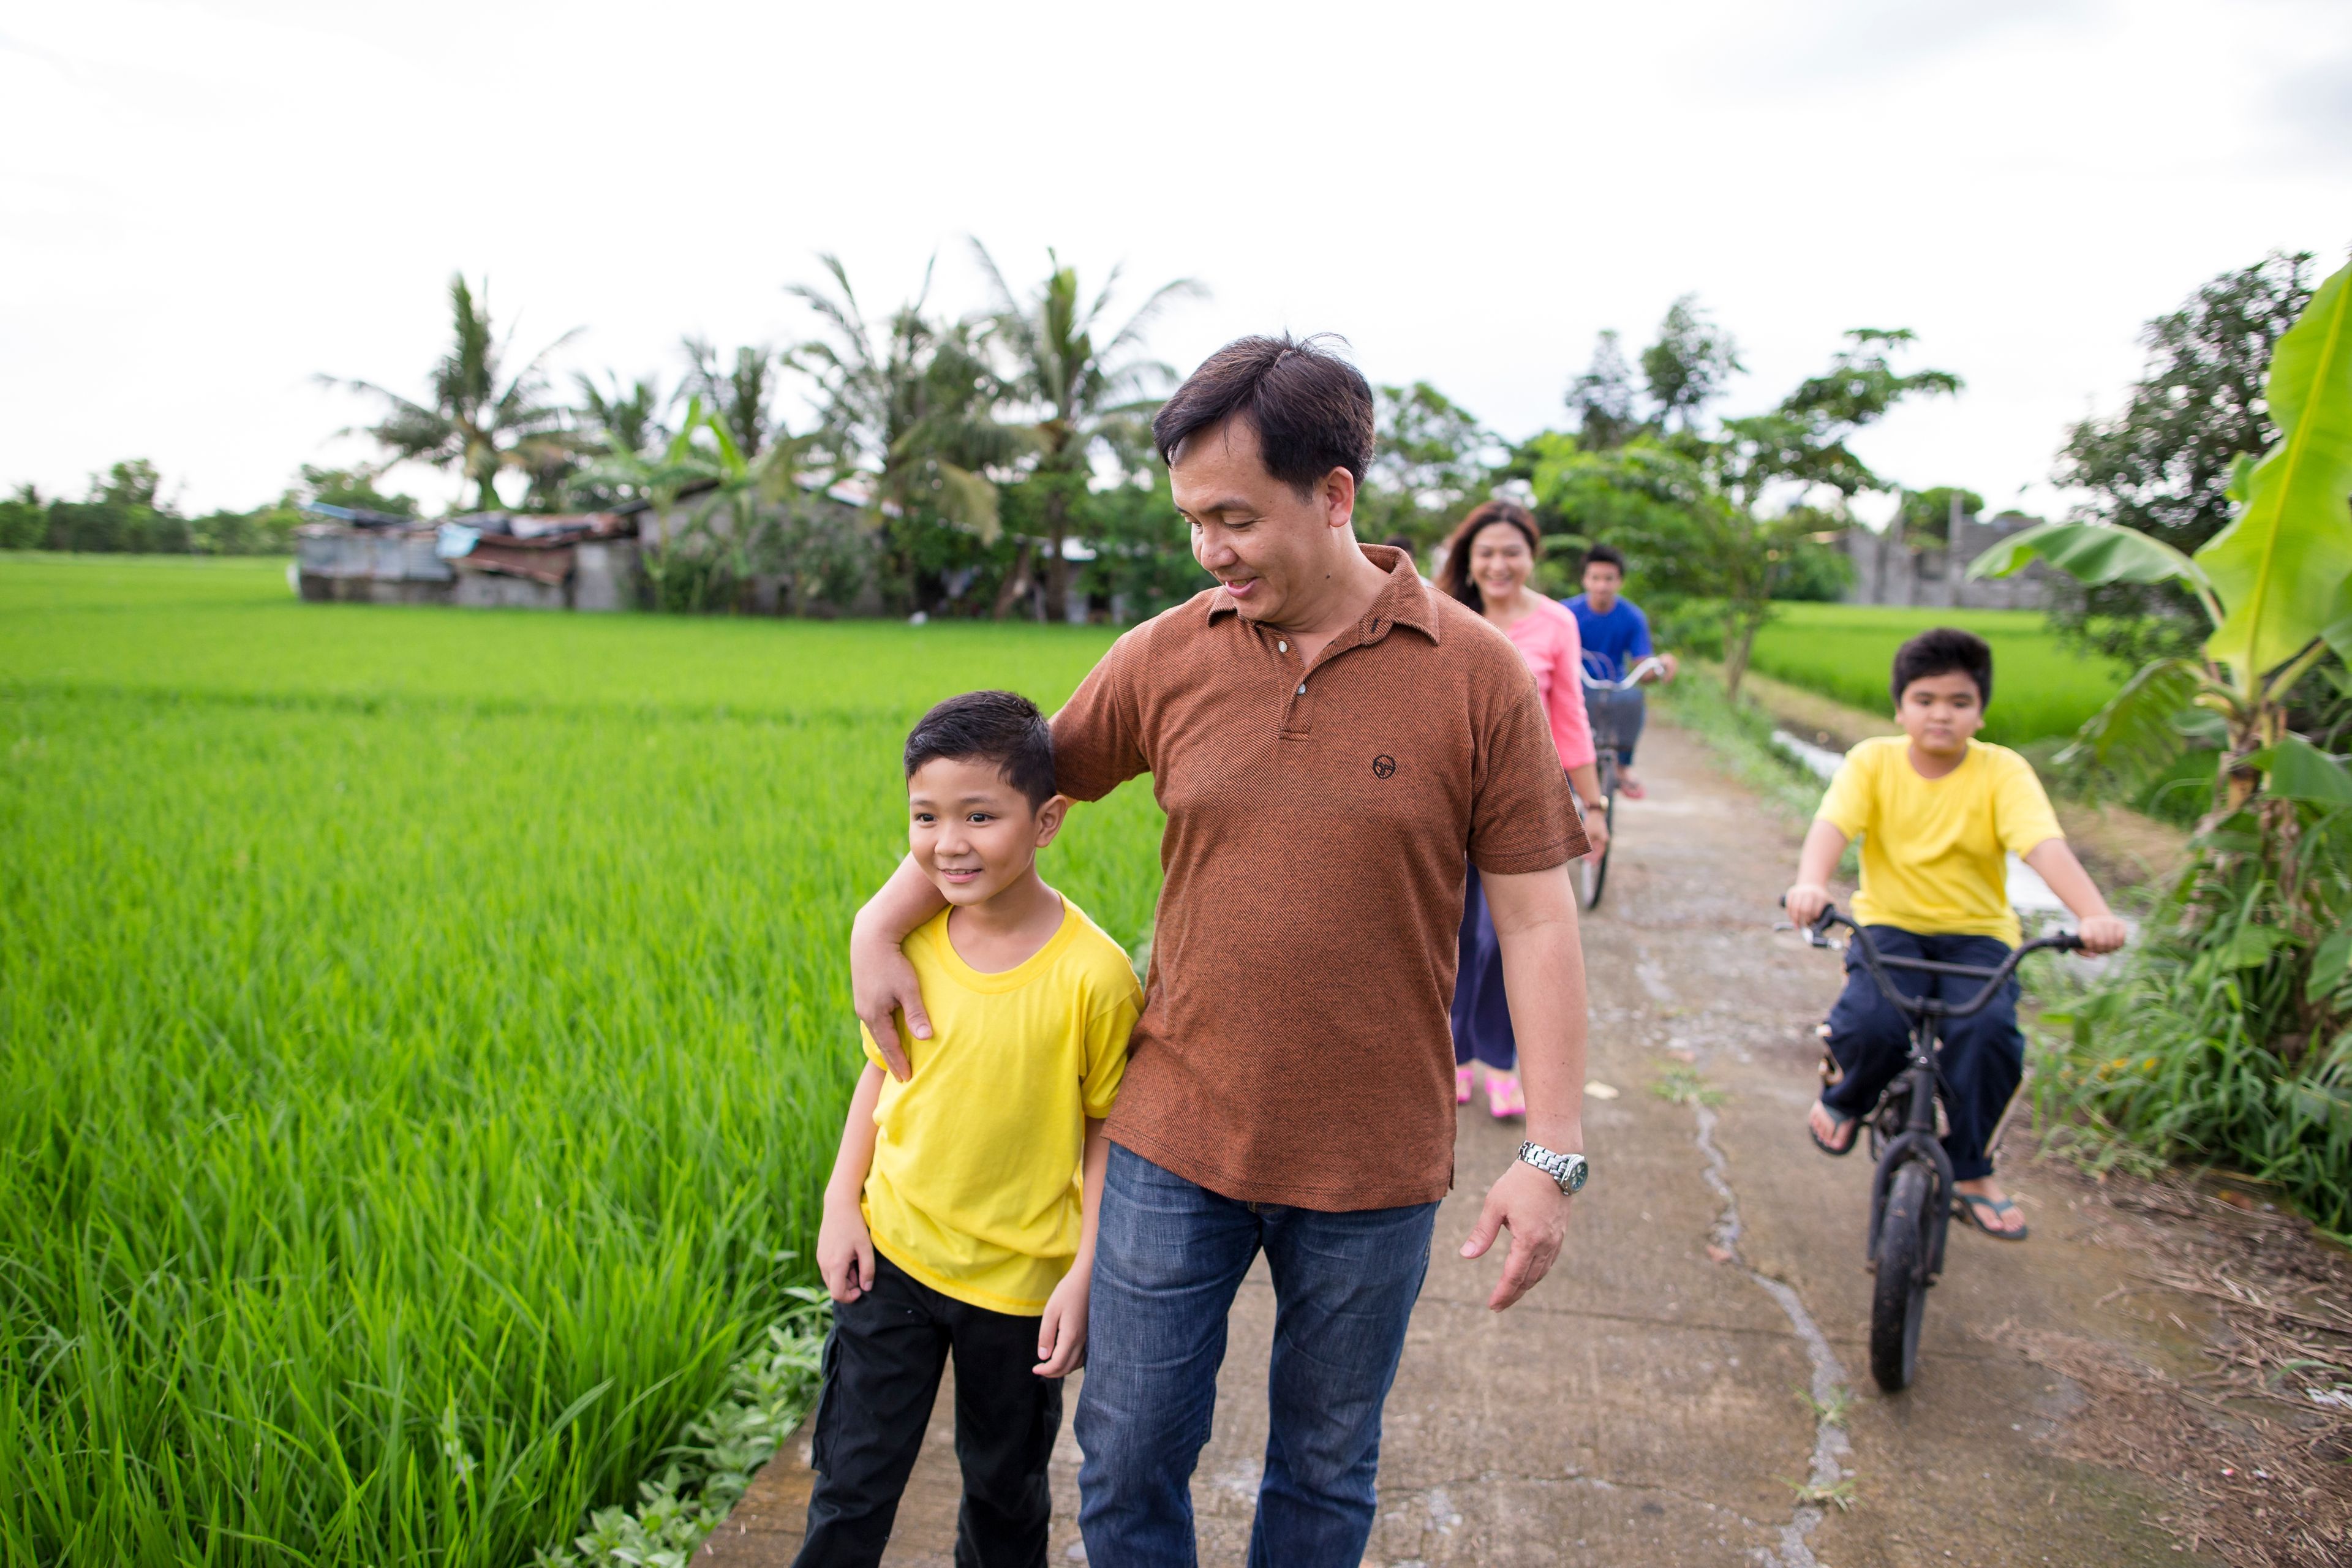 A father goes for a walk through a field with his family.